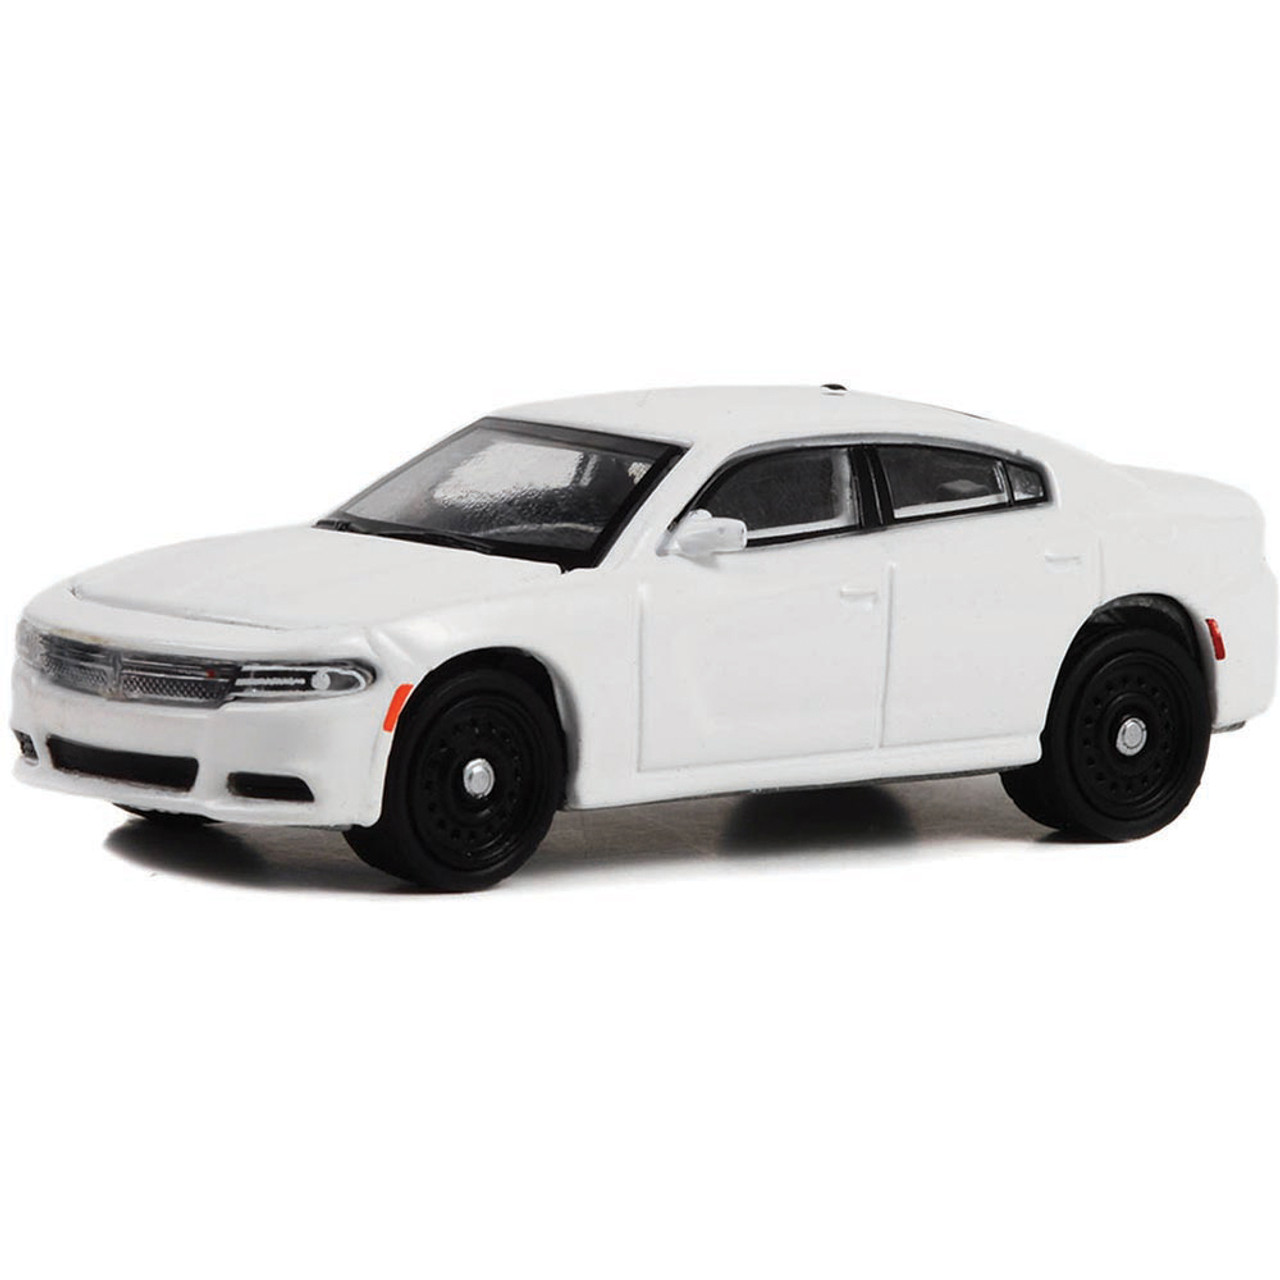 black charger police car